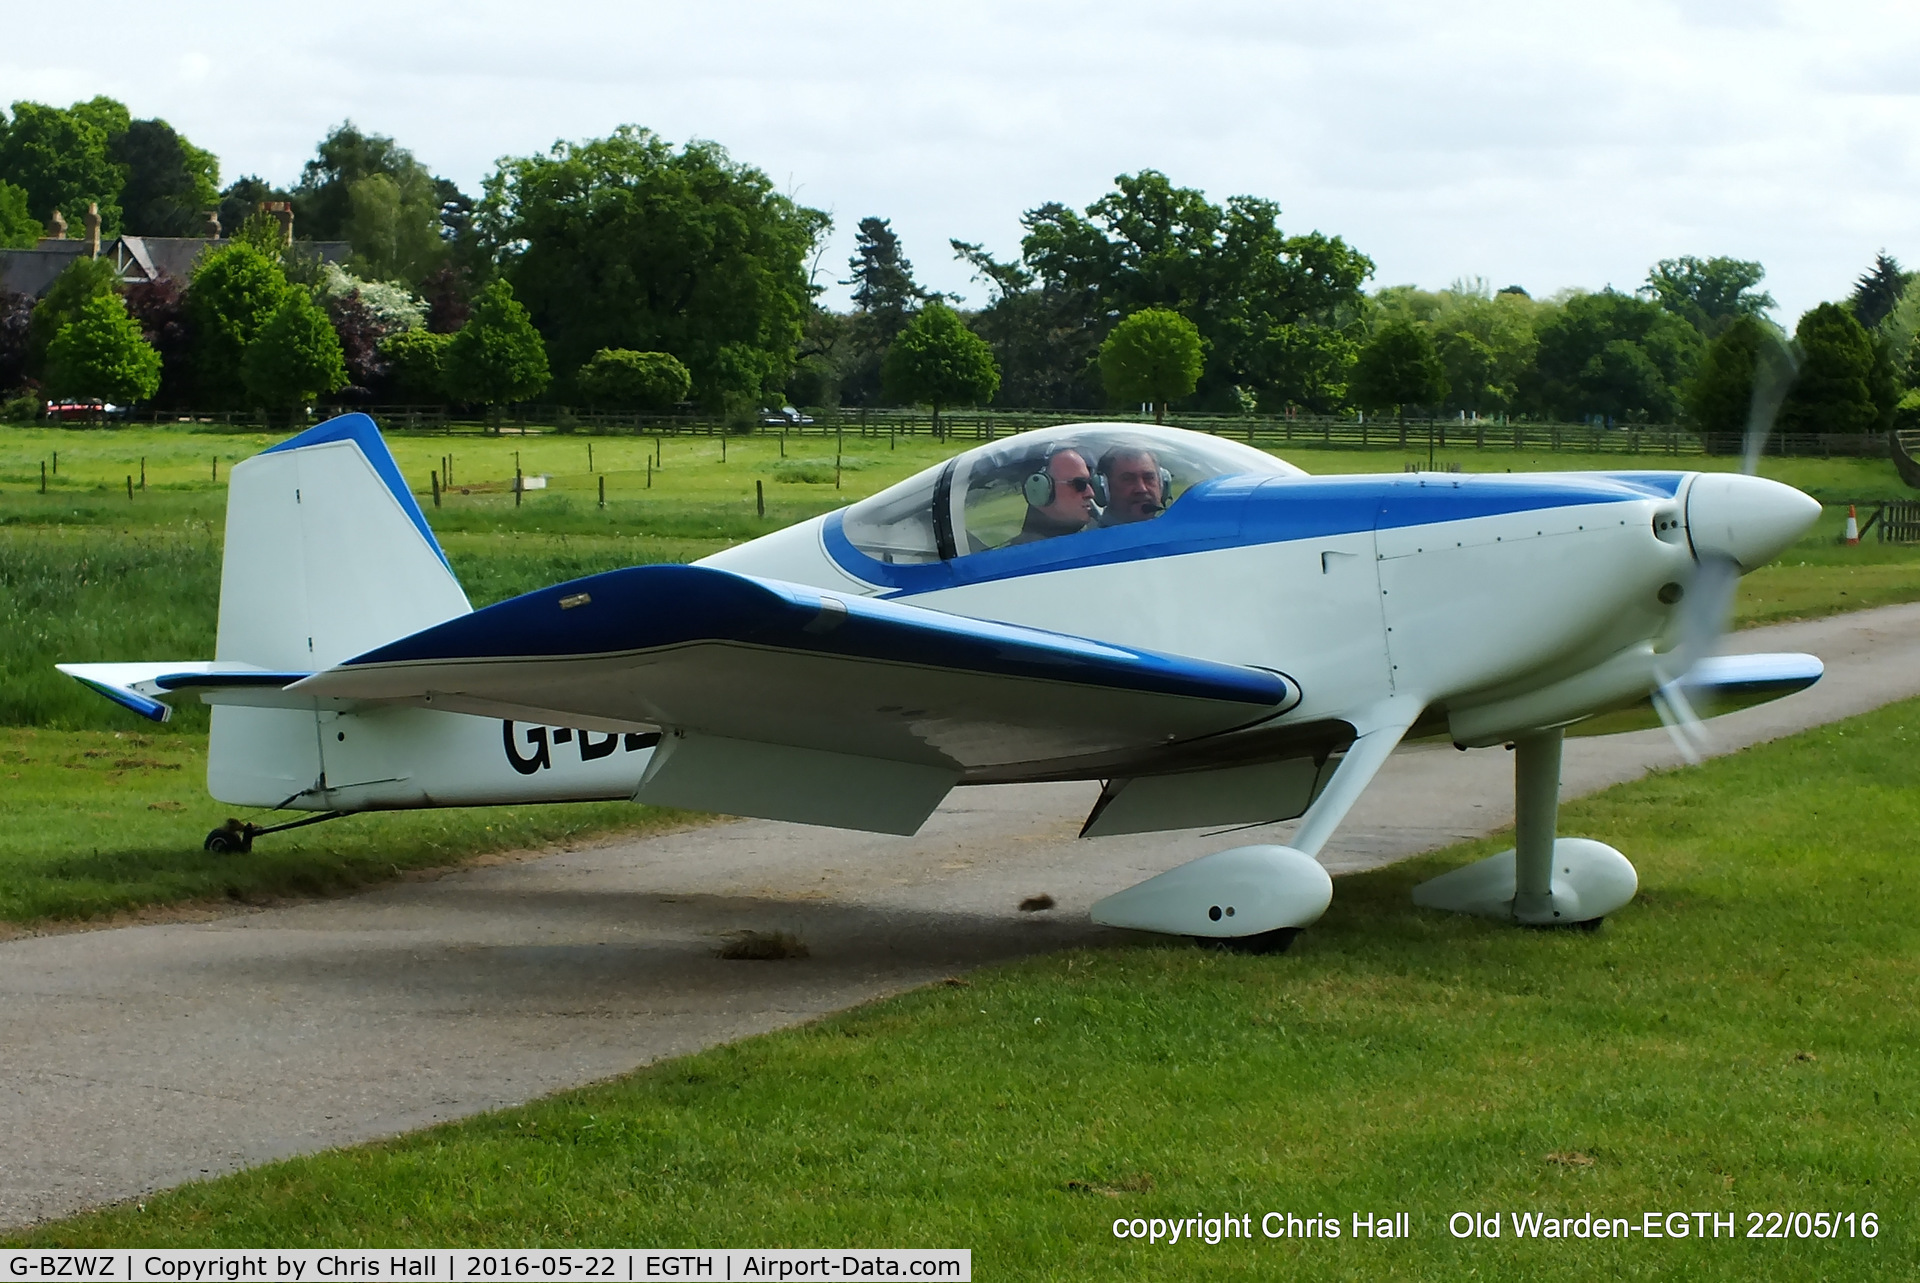 G-BZWZ, 2003 Van's RV-6 C/N PFA 181A-13419, 70th Anniversary of the first flight of the de Havilland Chipmunk Fly-In at Old Warden